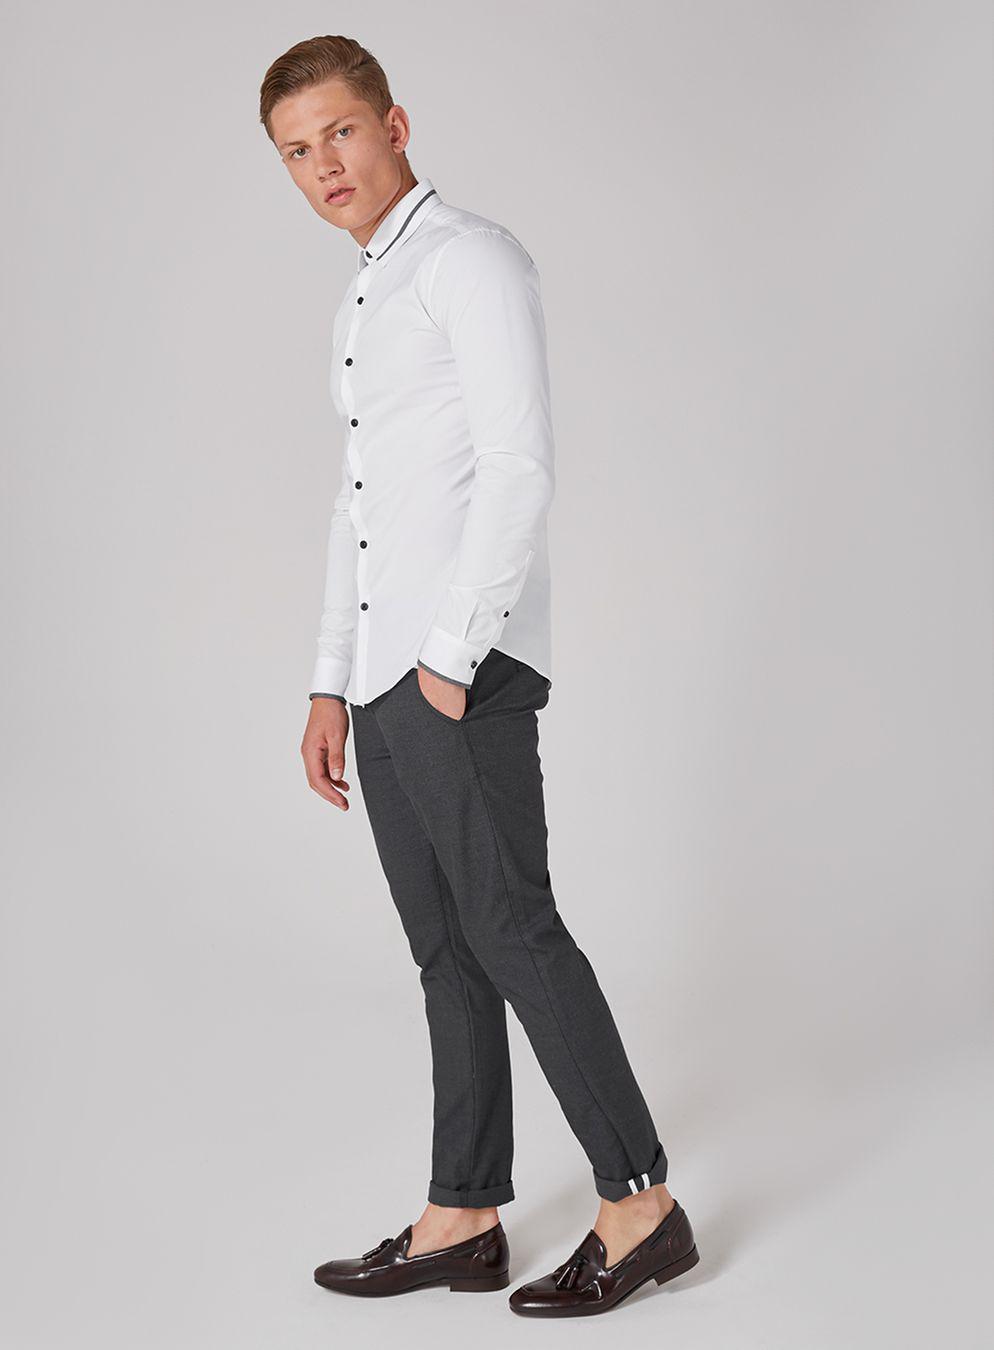 Lyst - Topman White Contrast Muscle Fit Long Sleeve Shirt in White for Men